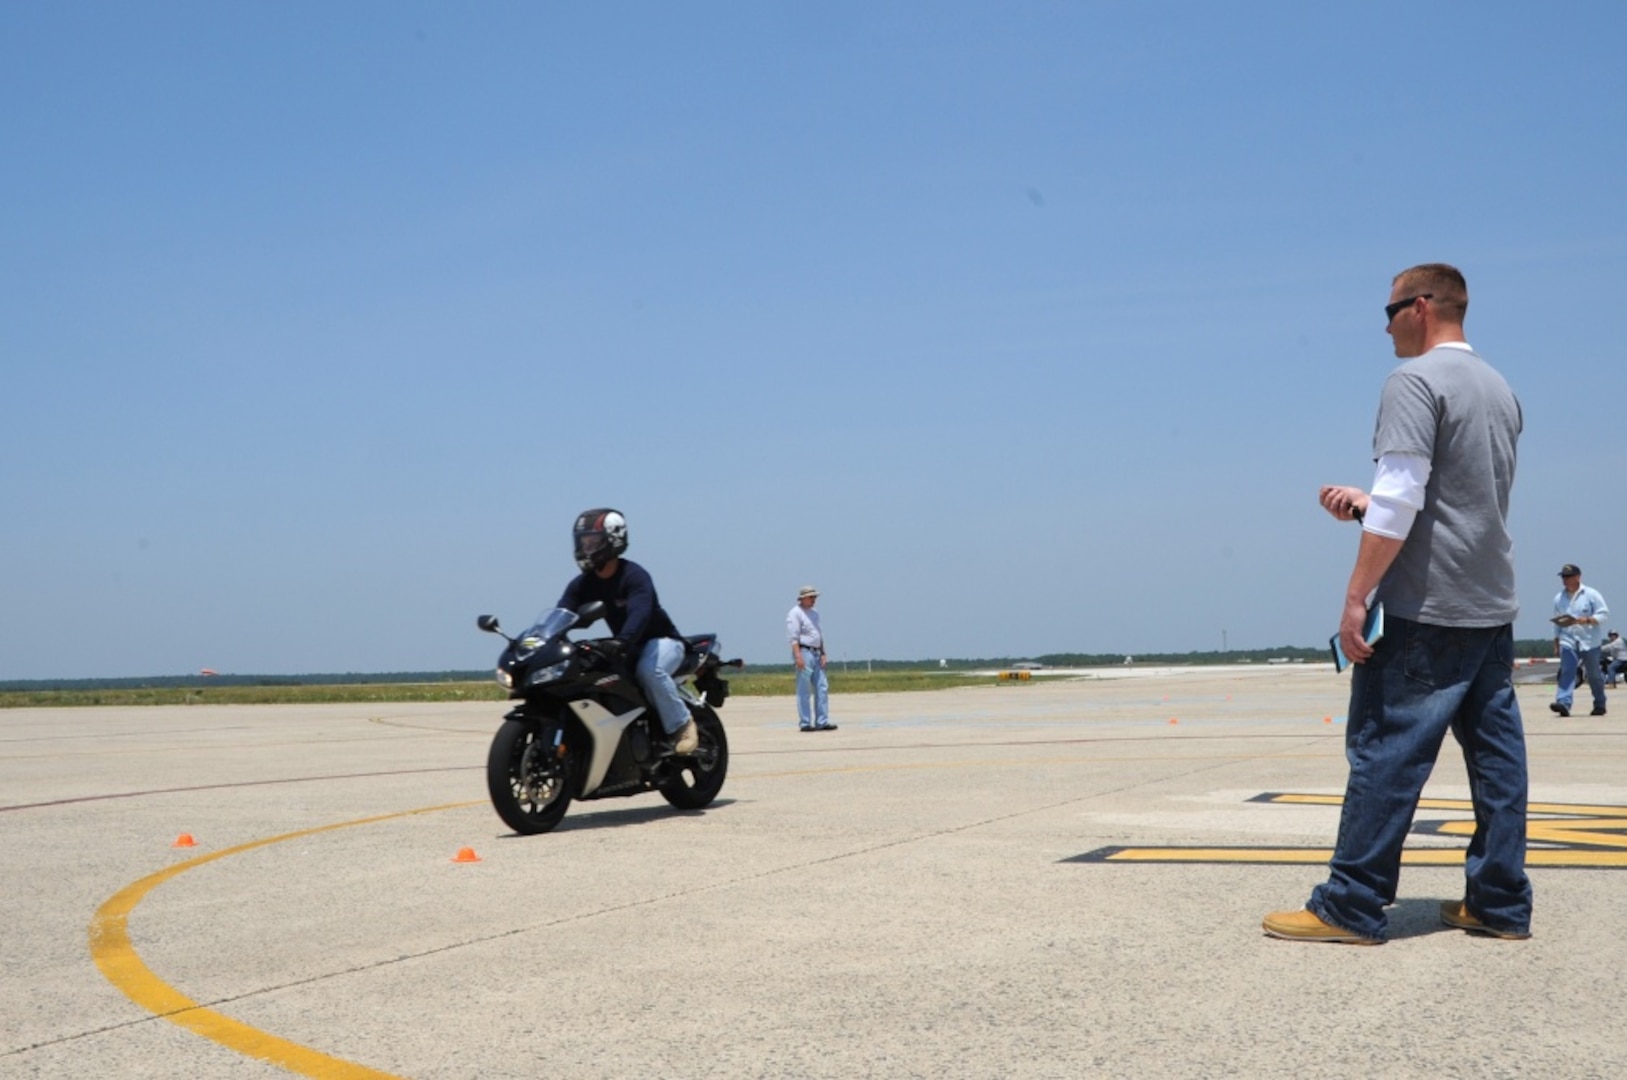 Chief Petty Officer Paul Greenwood, Electronics Support Detachment Atlantic City, N.J., times Senior Airman Charles Zingrone, member of the 177th Fighter Wing New Jersey Air National Guard, during his motorcycle safety course at Coast Guard Air Station Atlantic City June 8, 2011. Greenwood is one of four Coast Guard members trained to conduct the course for active duty members, their dependants and retirees. U.S. Coast Guard photo by Petty Officer 2nd Class Crystalynn A. Kneen.